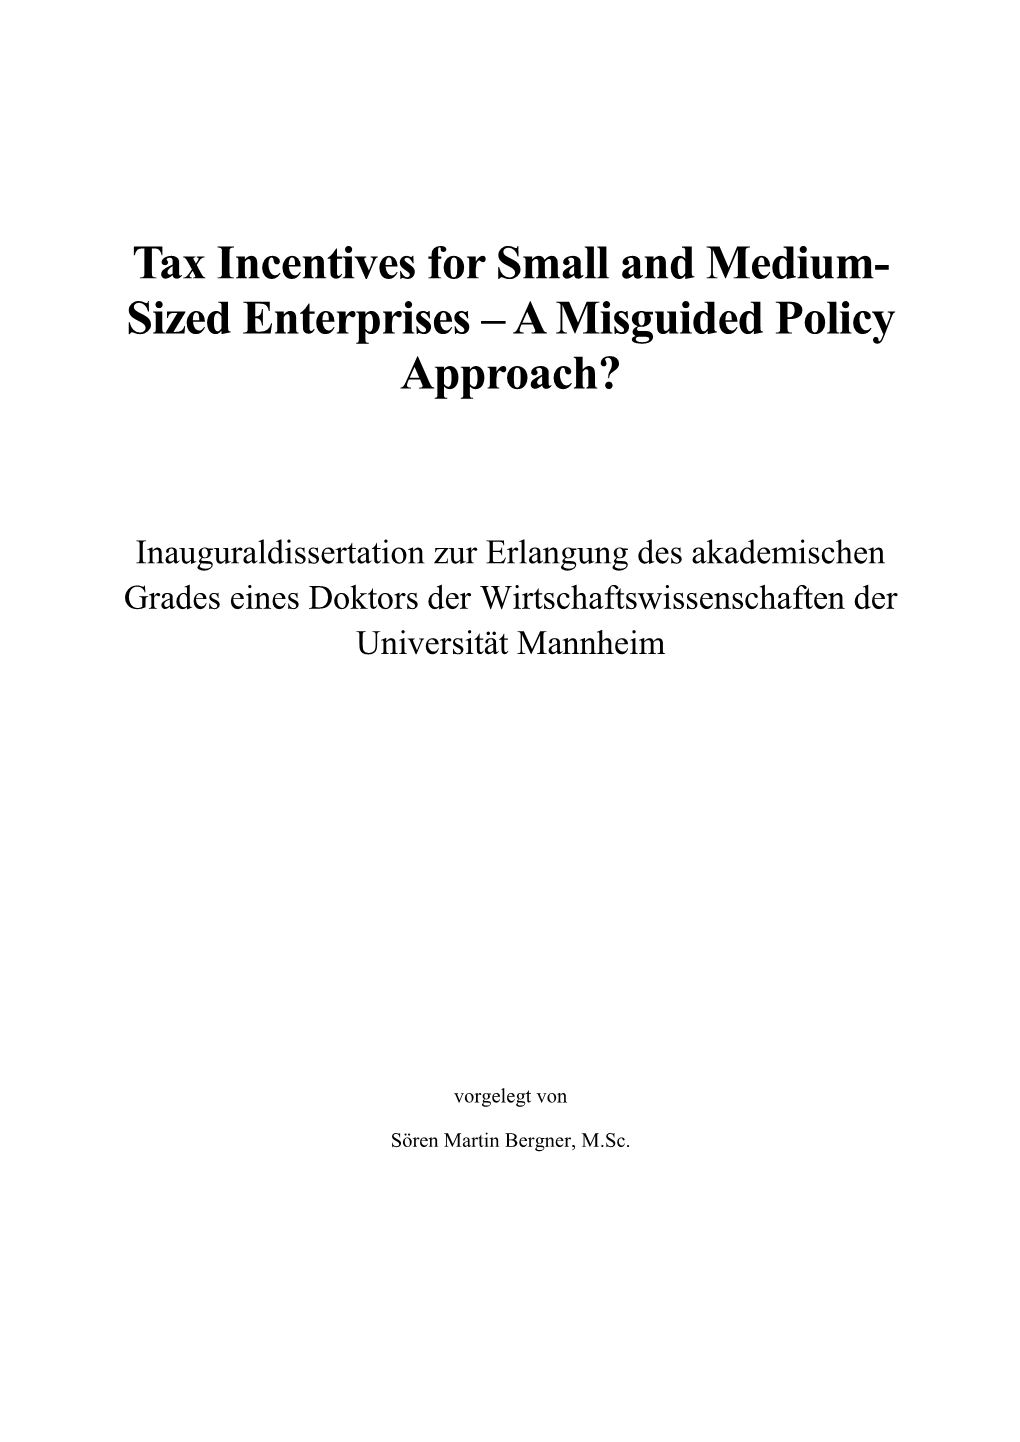 Tax Incentives for Small and Medium- Sized Enterprises – a Misguided Policy Approach?